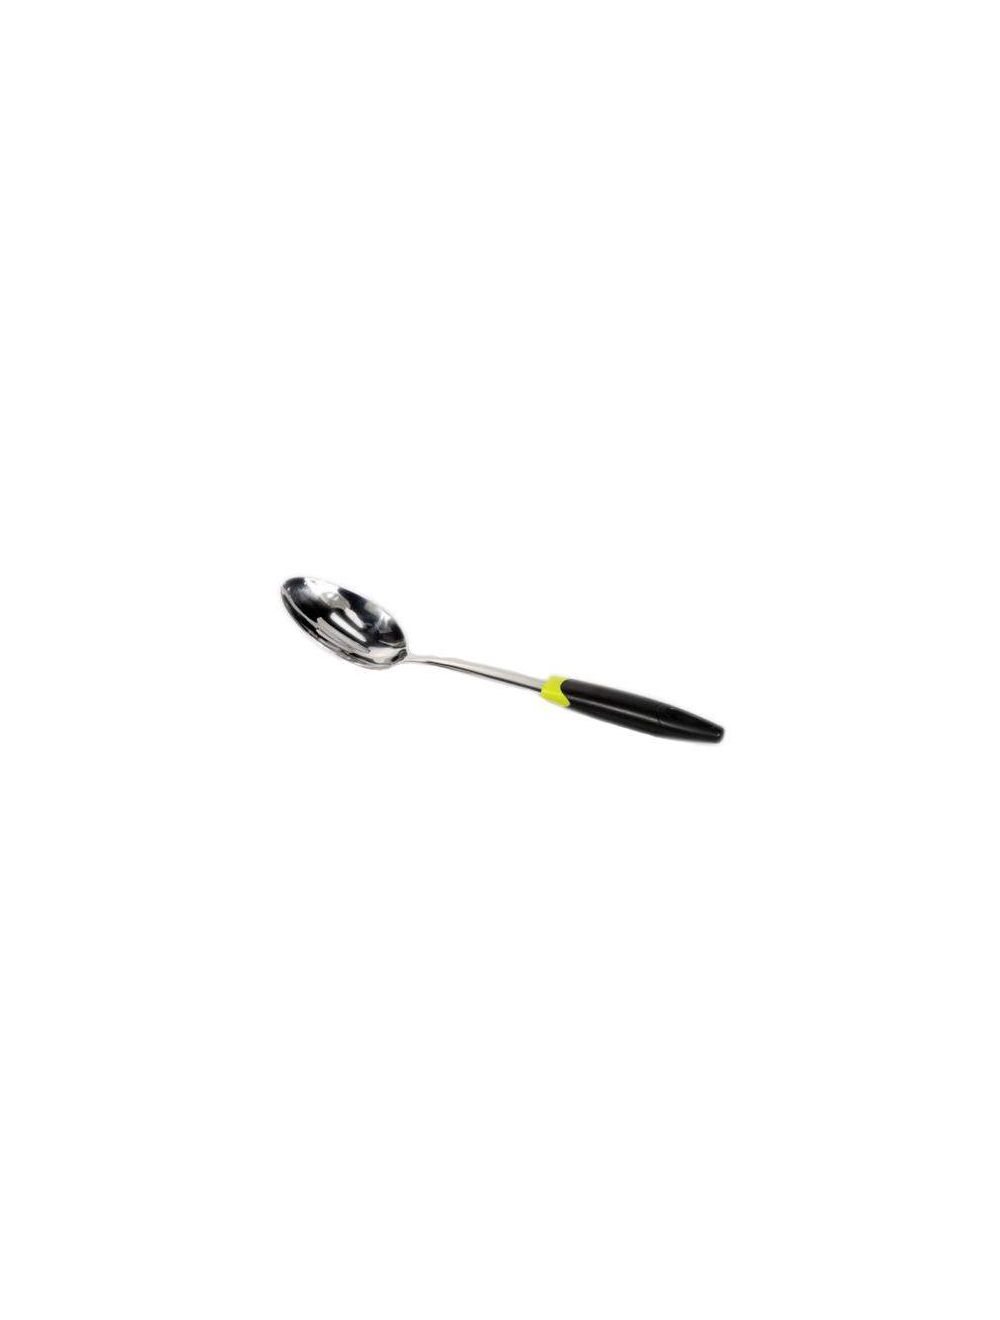 Royalford RF8912 Stainless Steel Slotted Spoon with ABS Handle